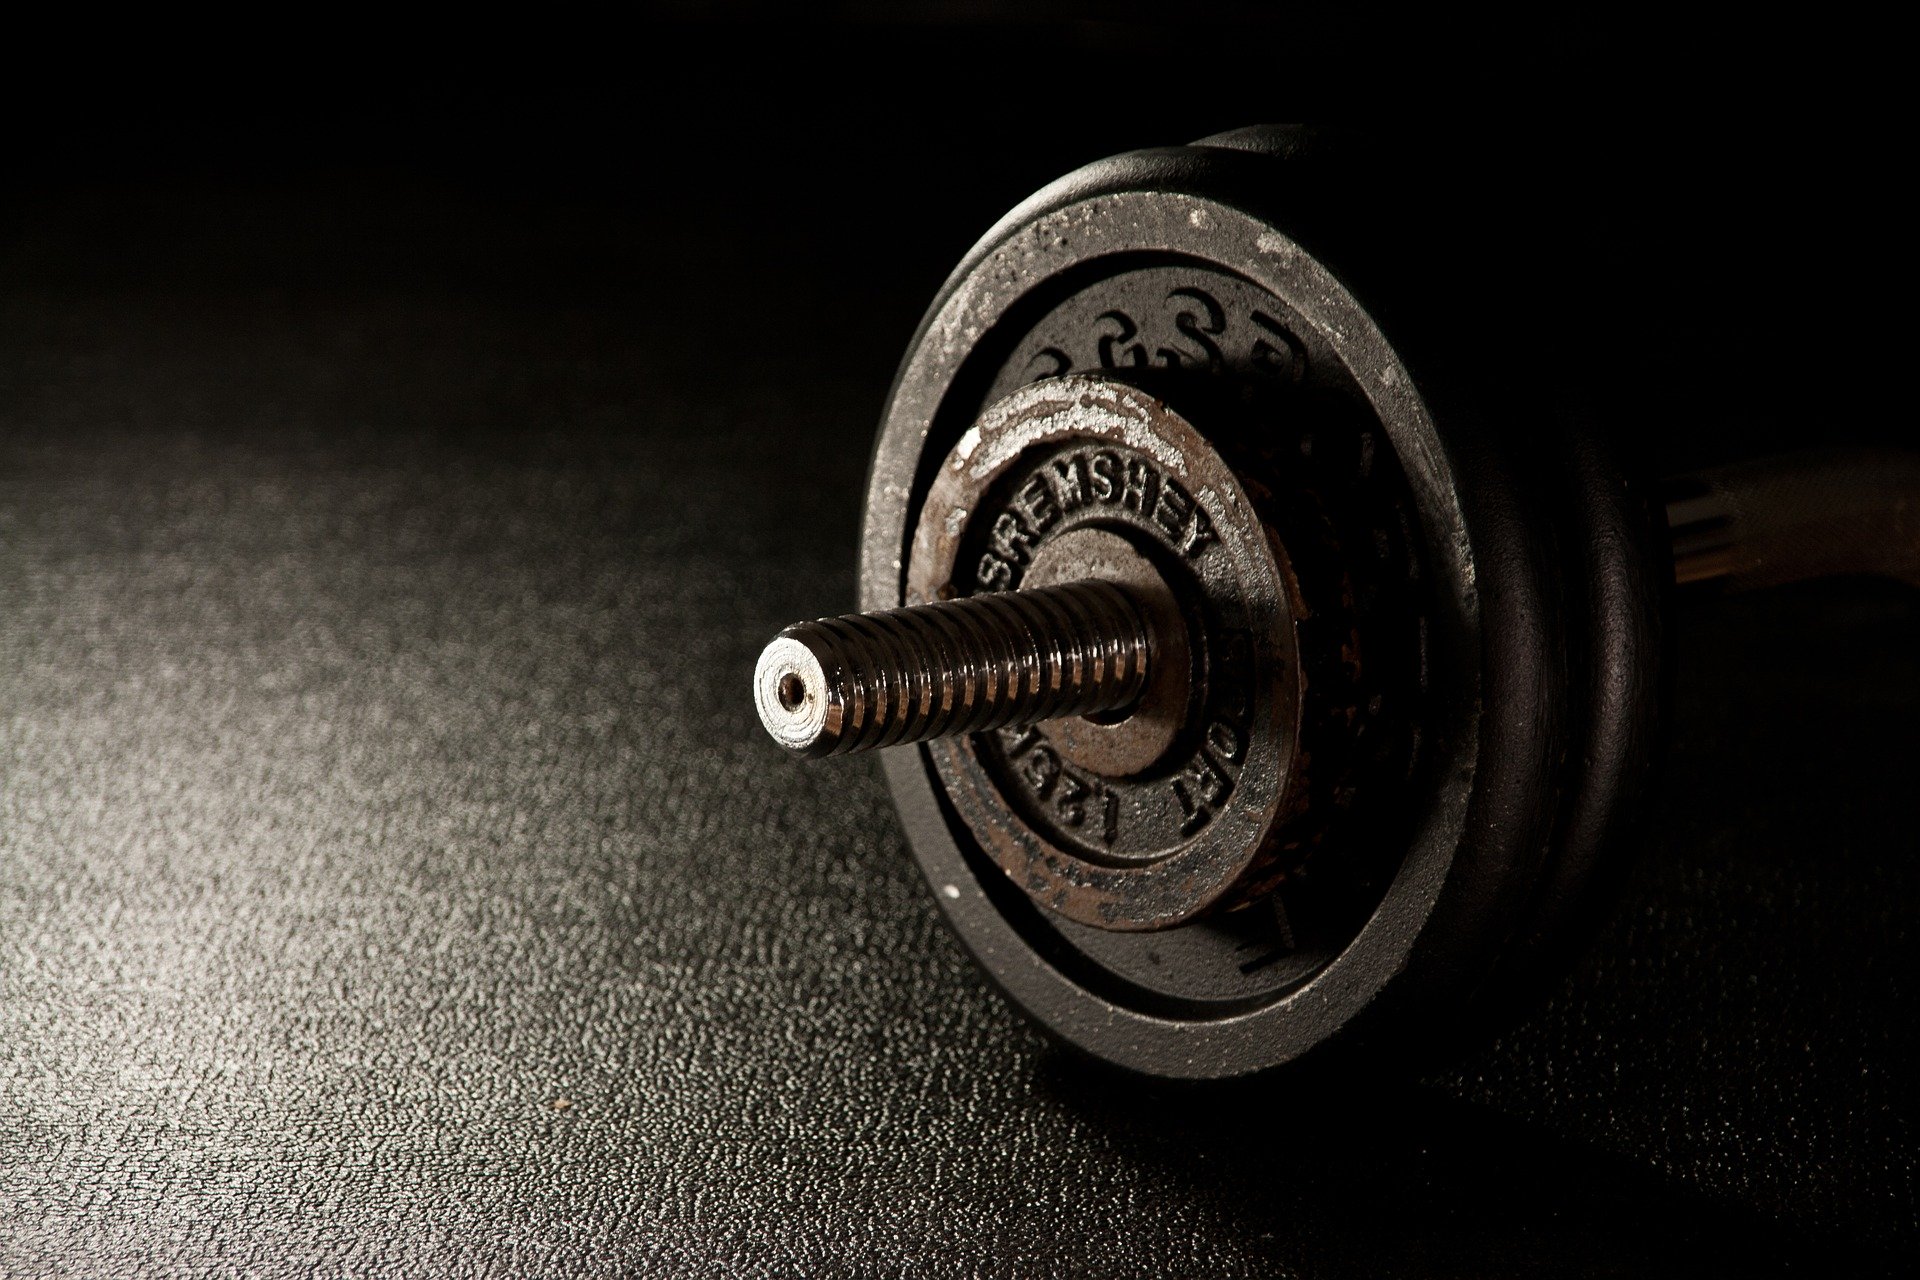 YOU HIT THE GYM HARD, BUT YOUR MUSCLES WON'T GROW. WHY?